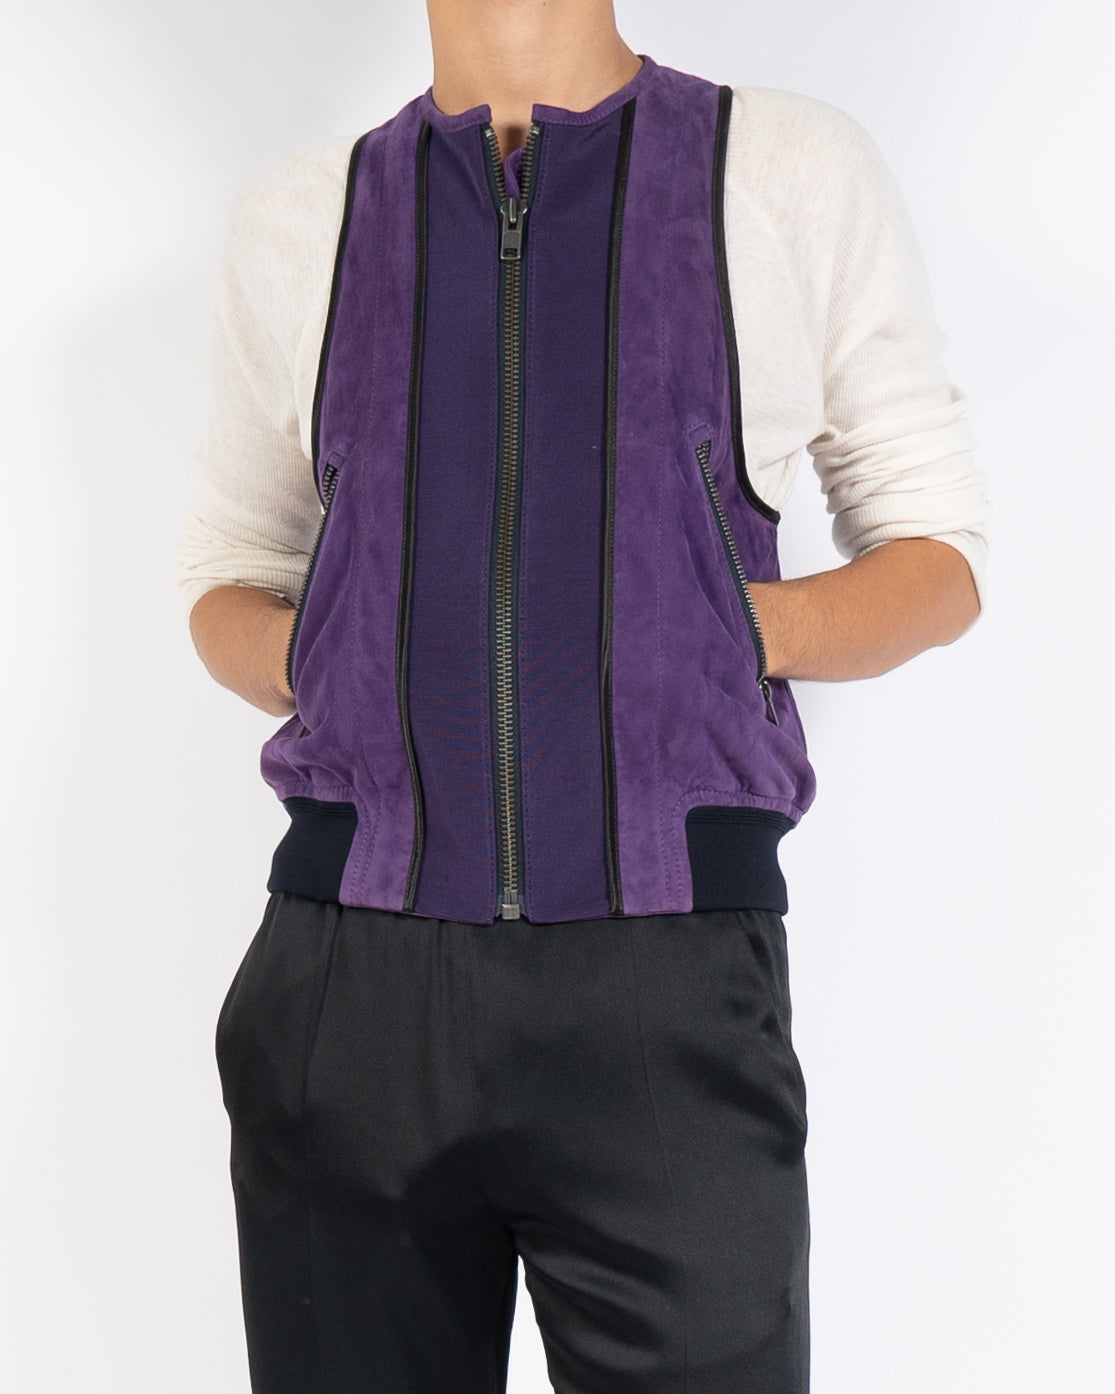 SS18 Violet Suede Waistcoat 1 of 1 Sample